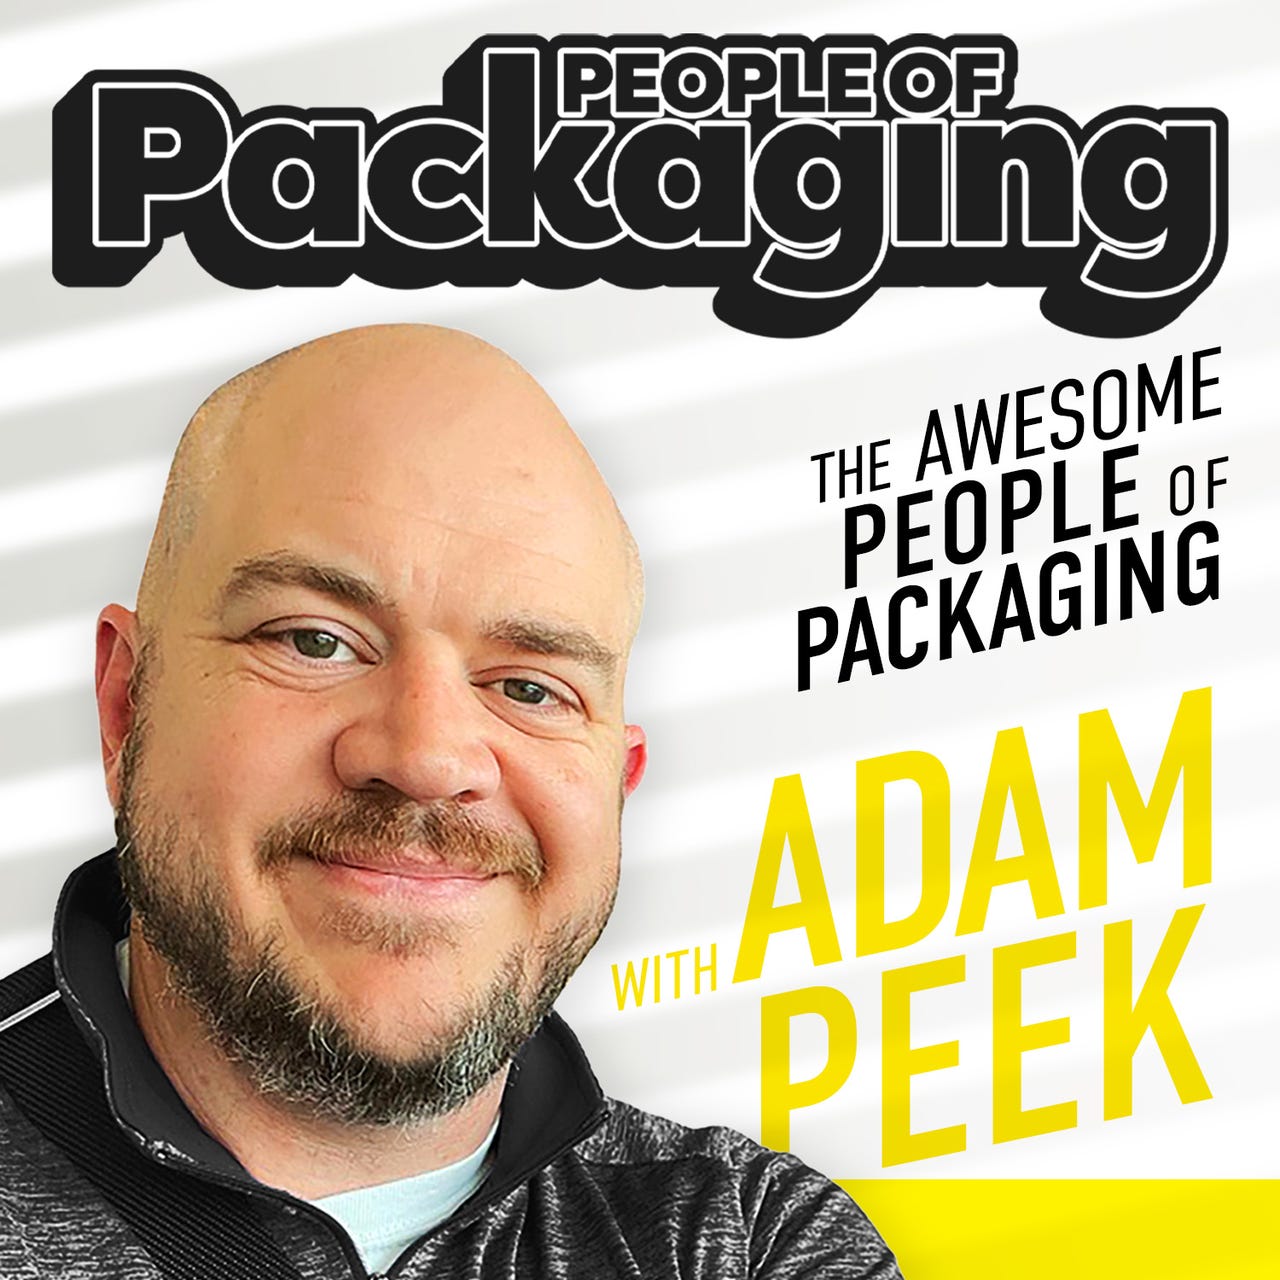 Artwork for Packaging Is Awesome with Adam Peek